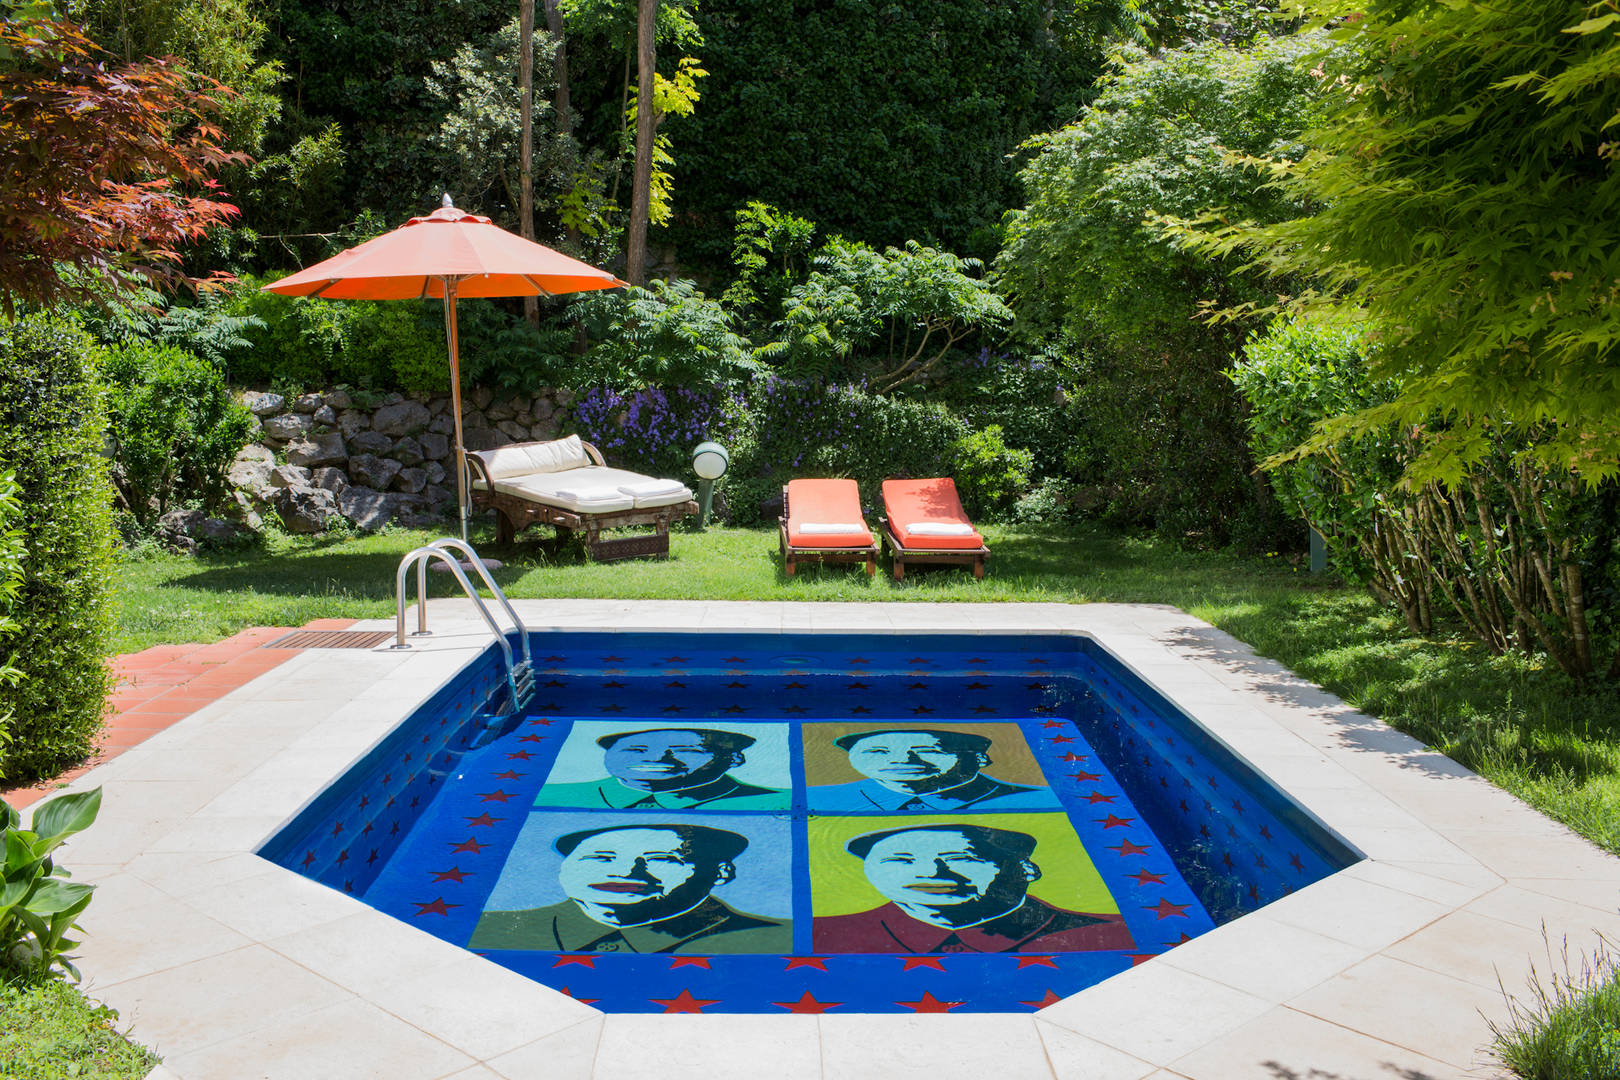 A private pool with an iconic Warhol painting